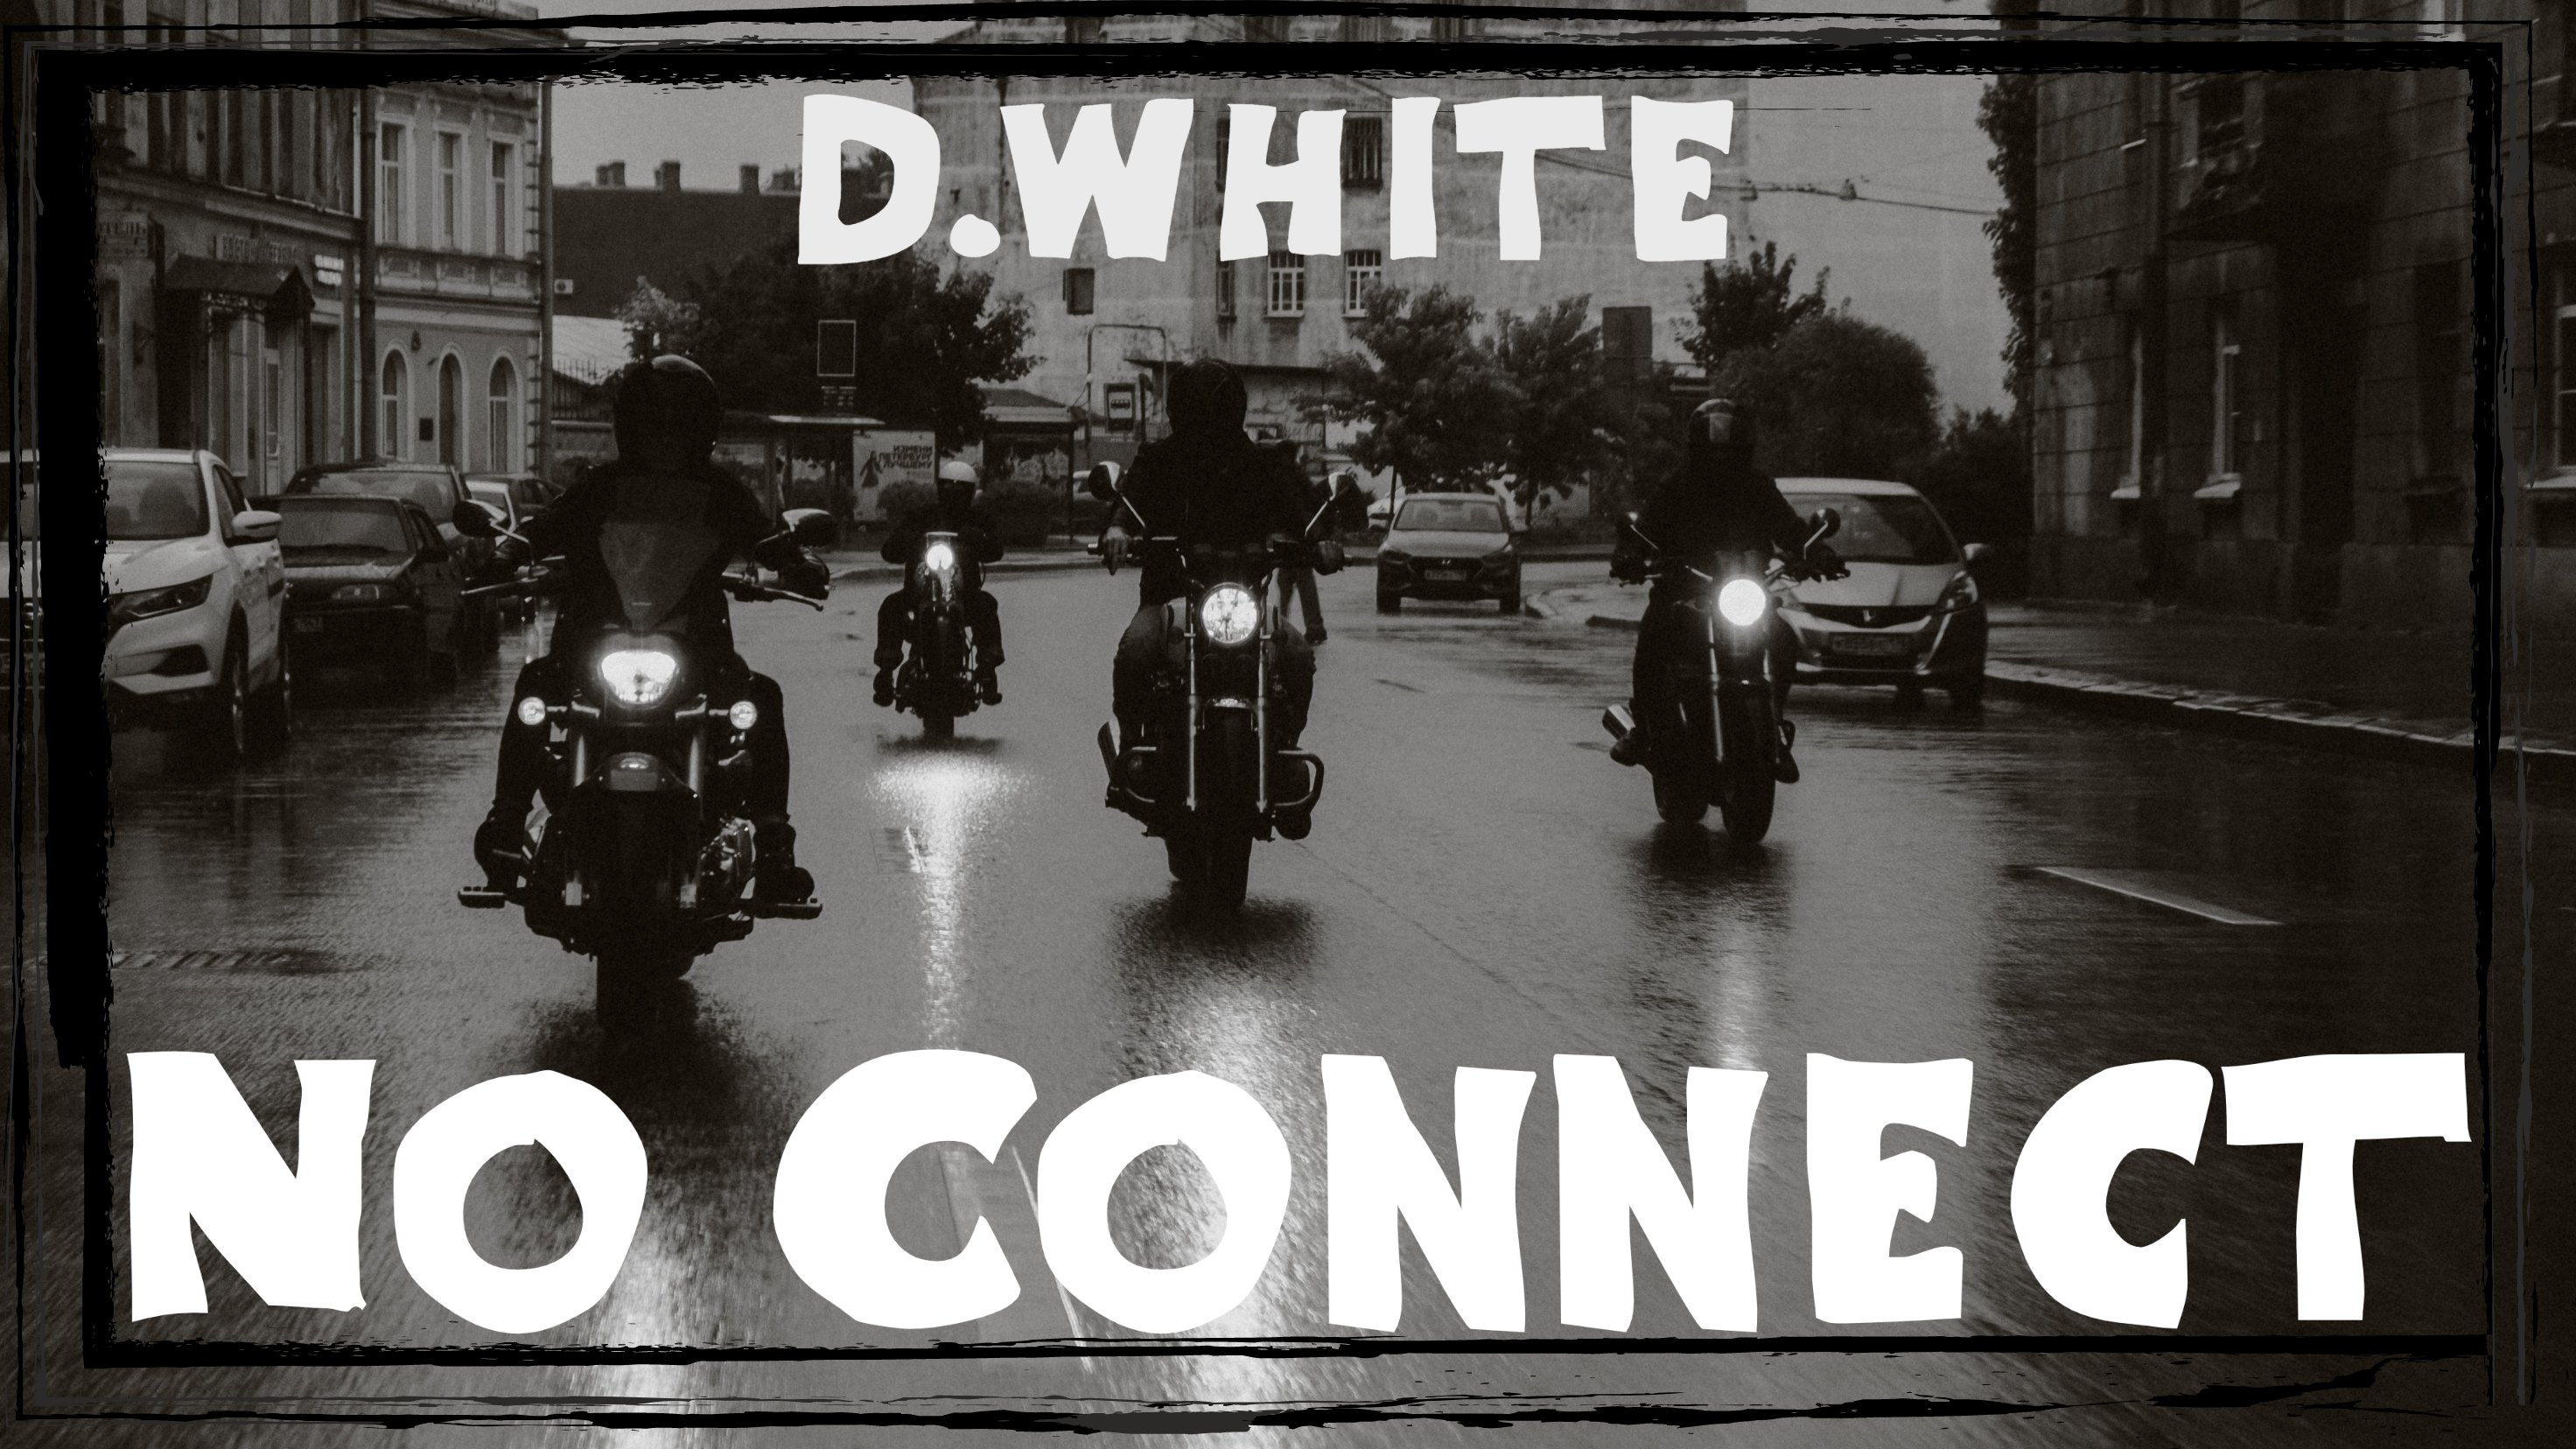 D.White - No Connect (Remix). NEW ITALO DISCO, Euro Disco, music 80s-90s, Best Driving Motorcycle